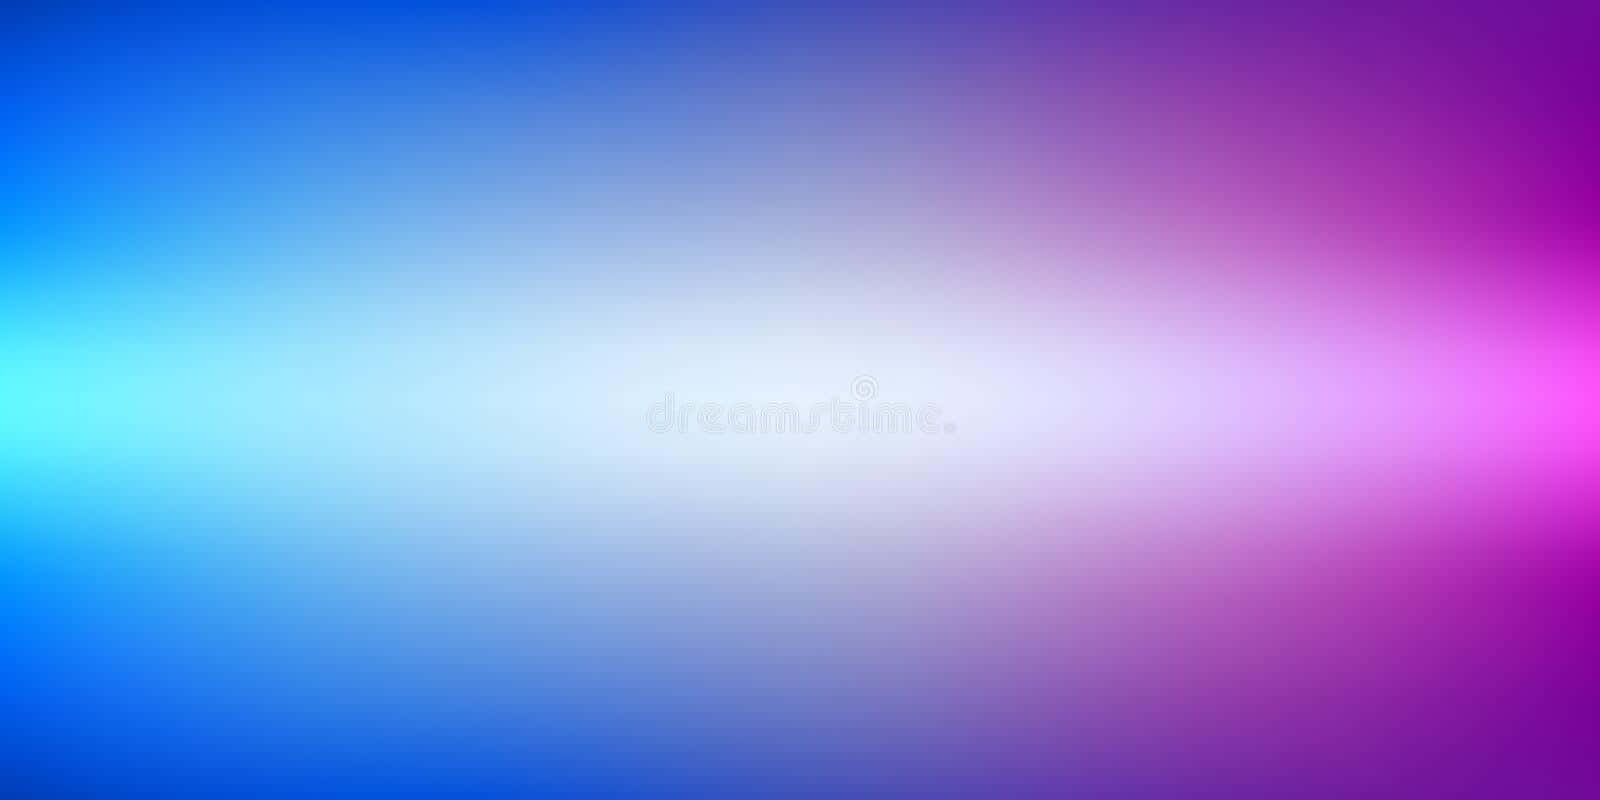 An Ever-Changing Gradient of Vibrant Purples and Blues Wallpaper